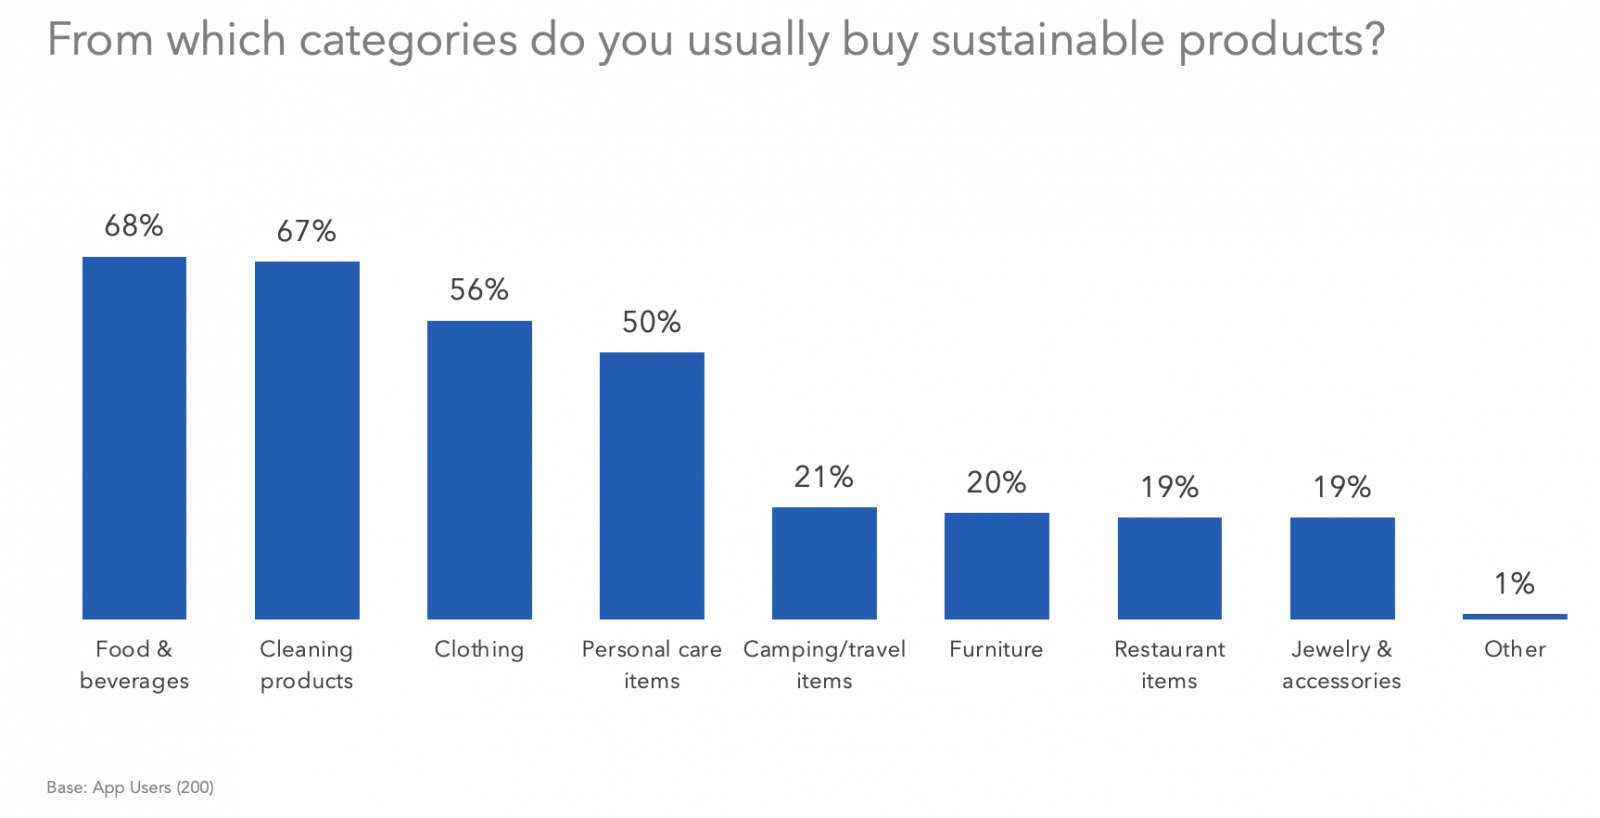 From which categories do you usually buy sustainable products?